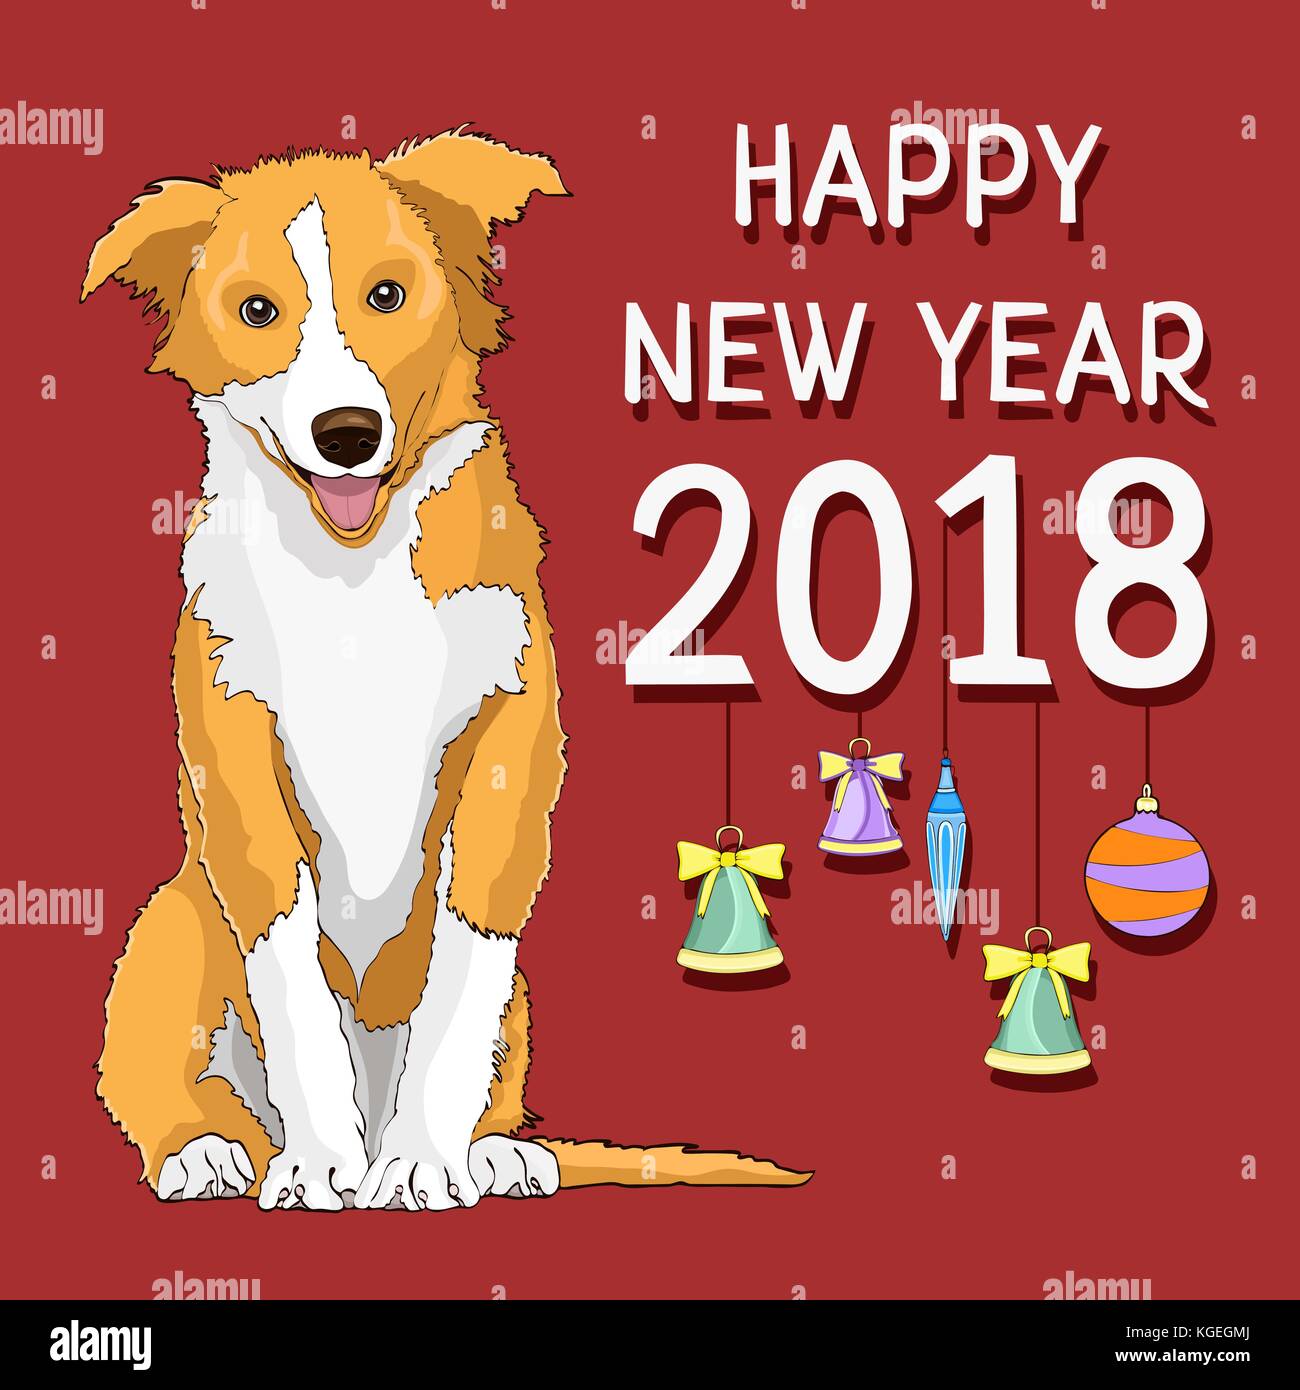 Happy new year, new year card with a drawn yellow dog symbol of the year 2018 and fur-tree toys on a red background. Vector illustration, banner, poster Stock Vector